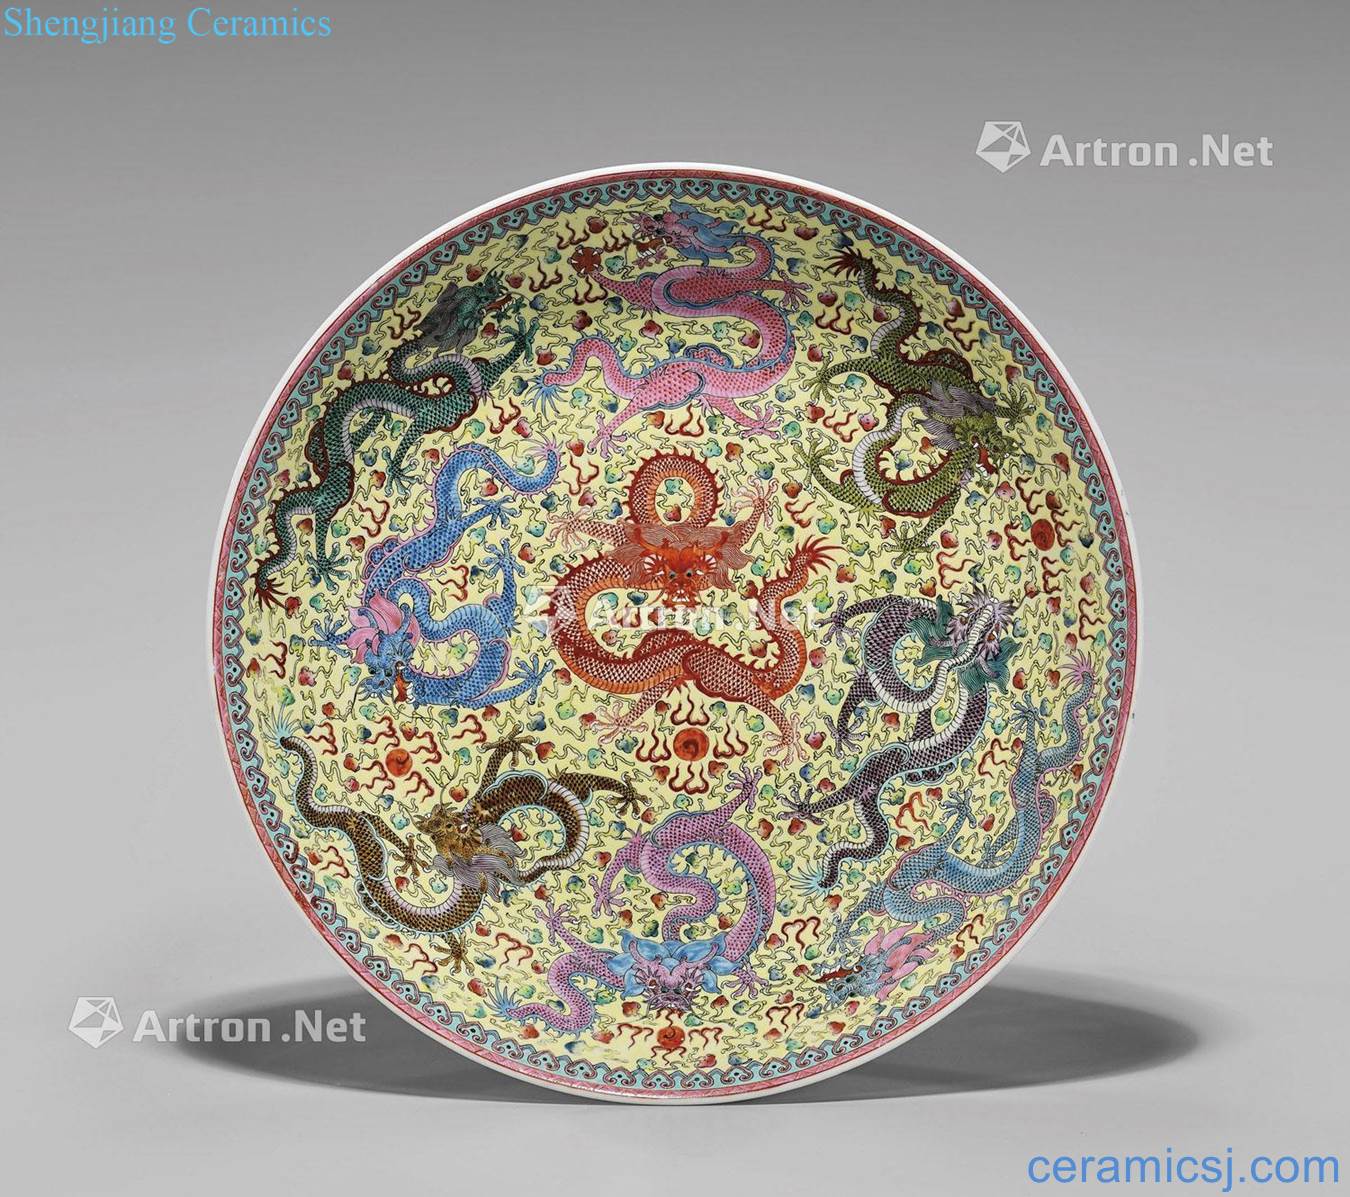 In the 19th century Imitation antique famille rose porcelain dish the reign of qianlong